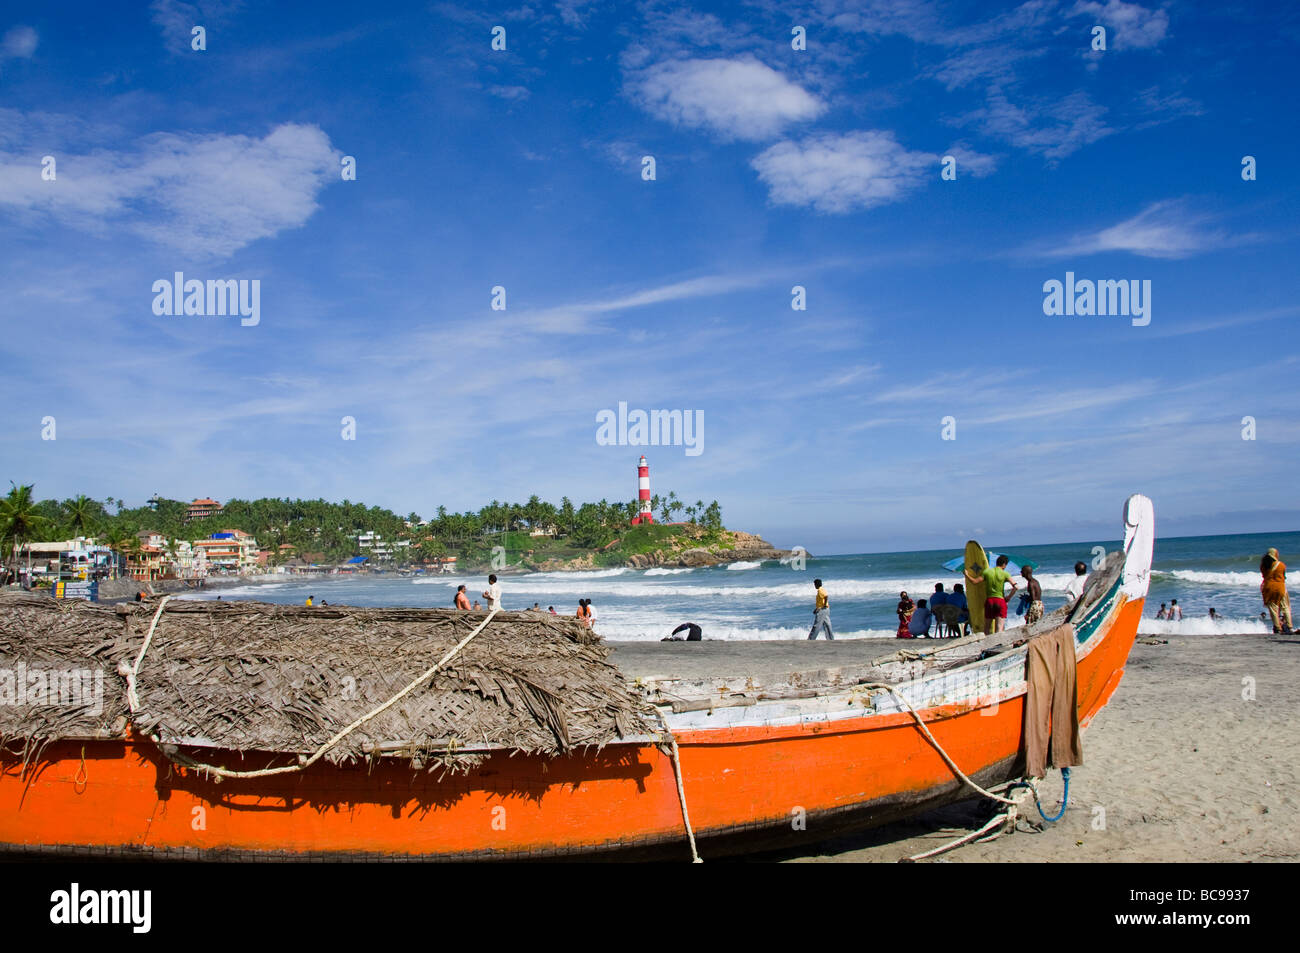 Kovalam beach view with light house as background, India Stock Photo